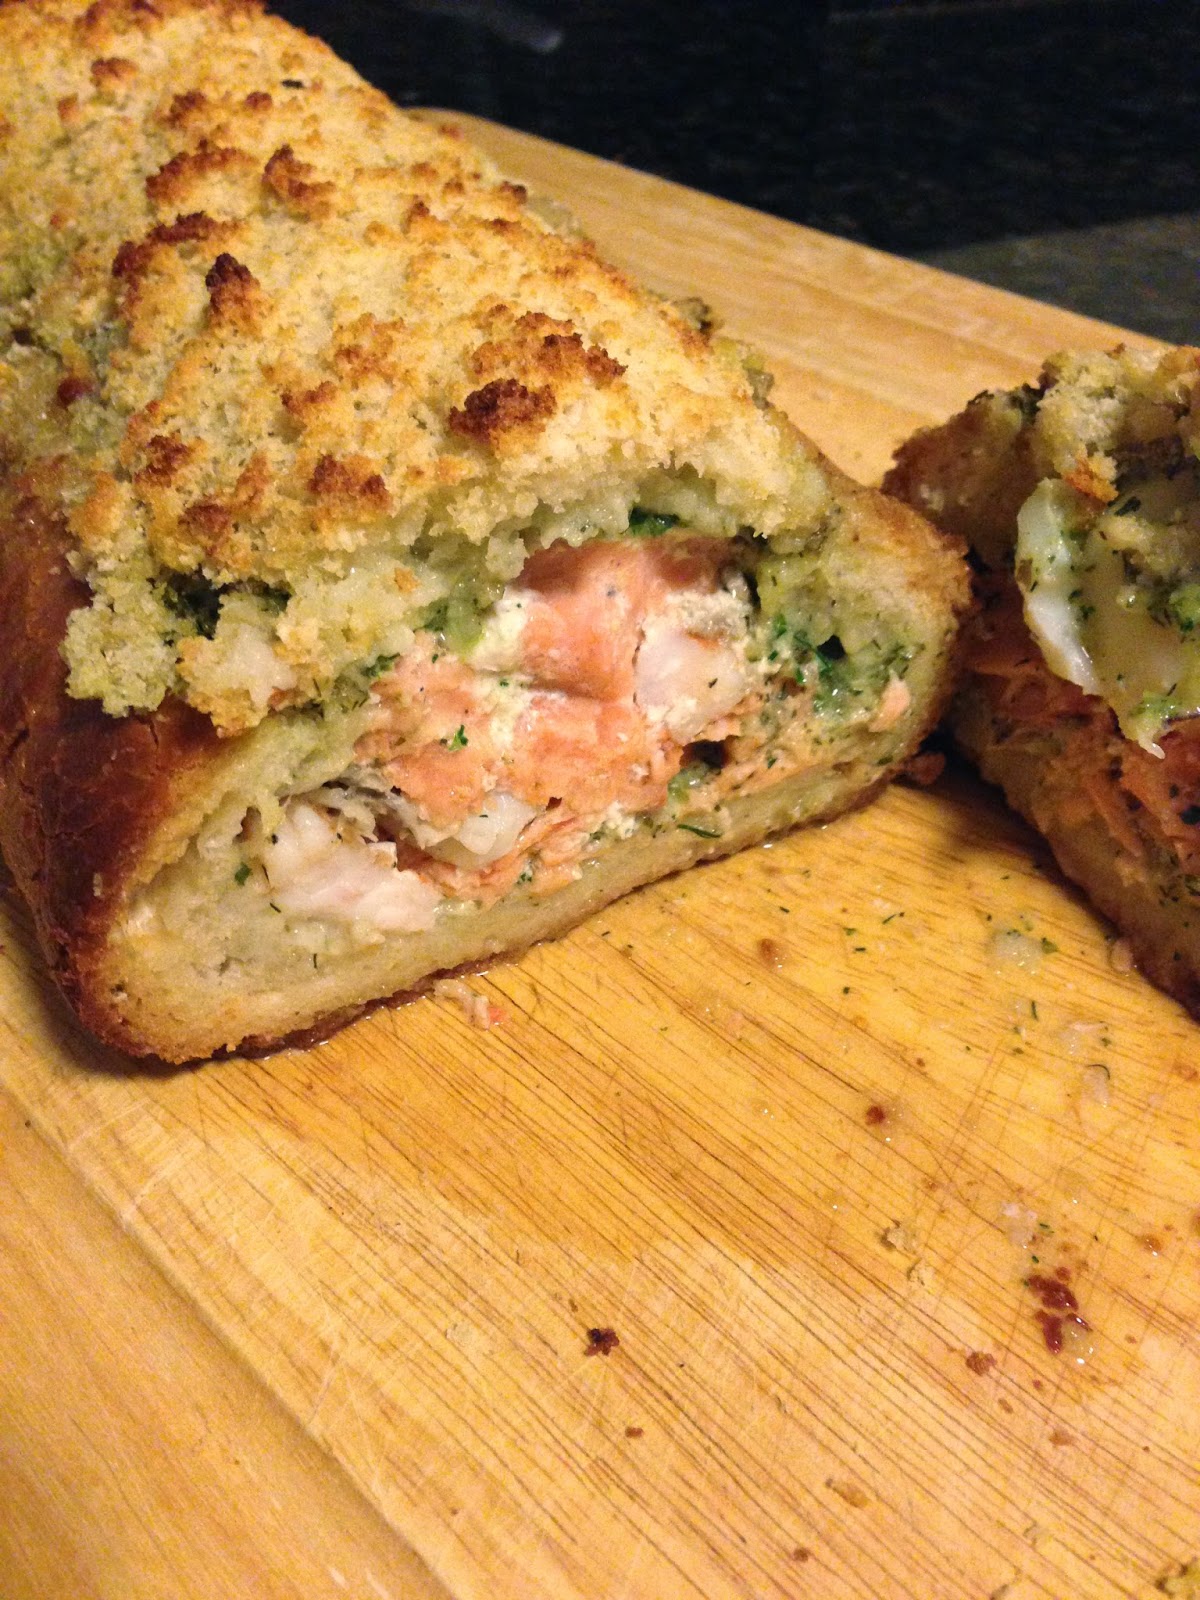 Jacques Pépin's Seafood Bread